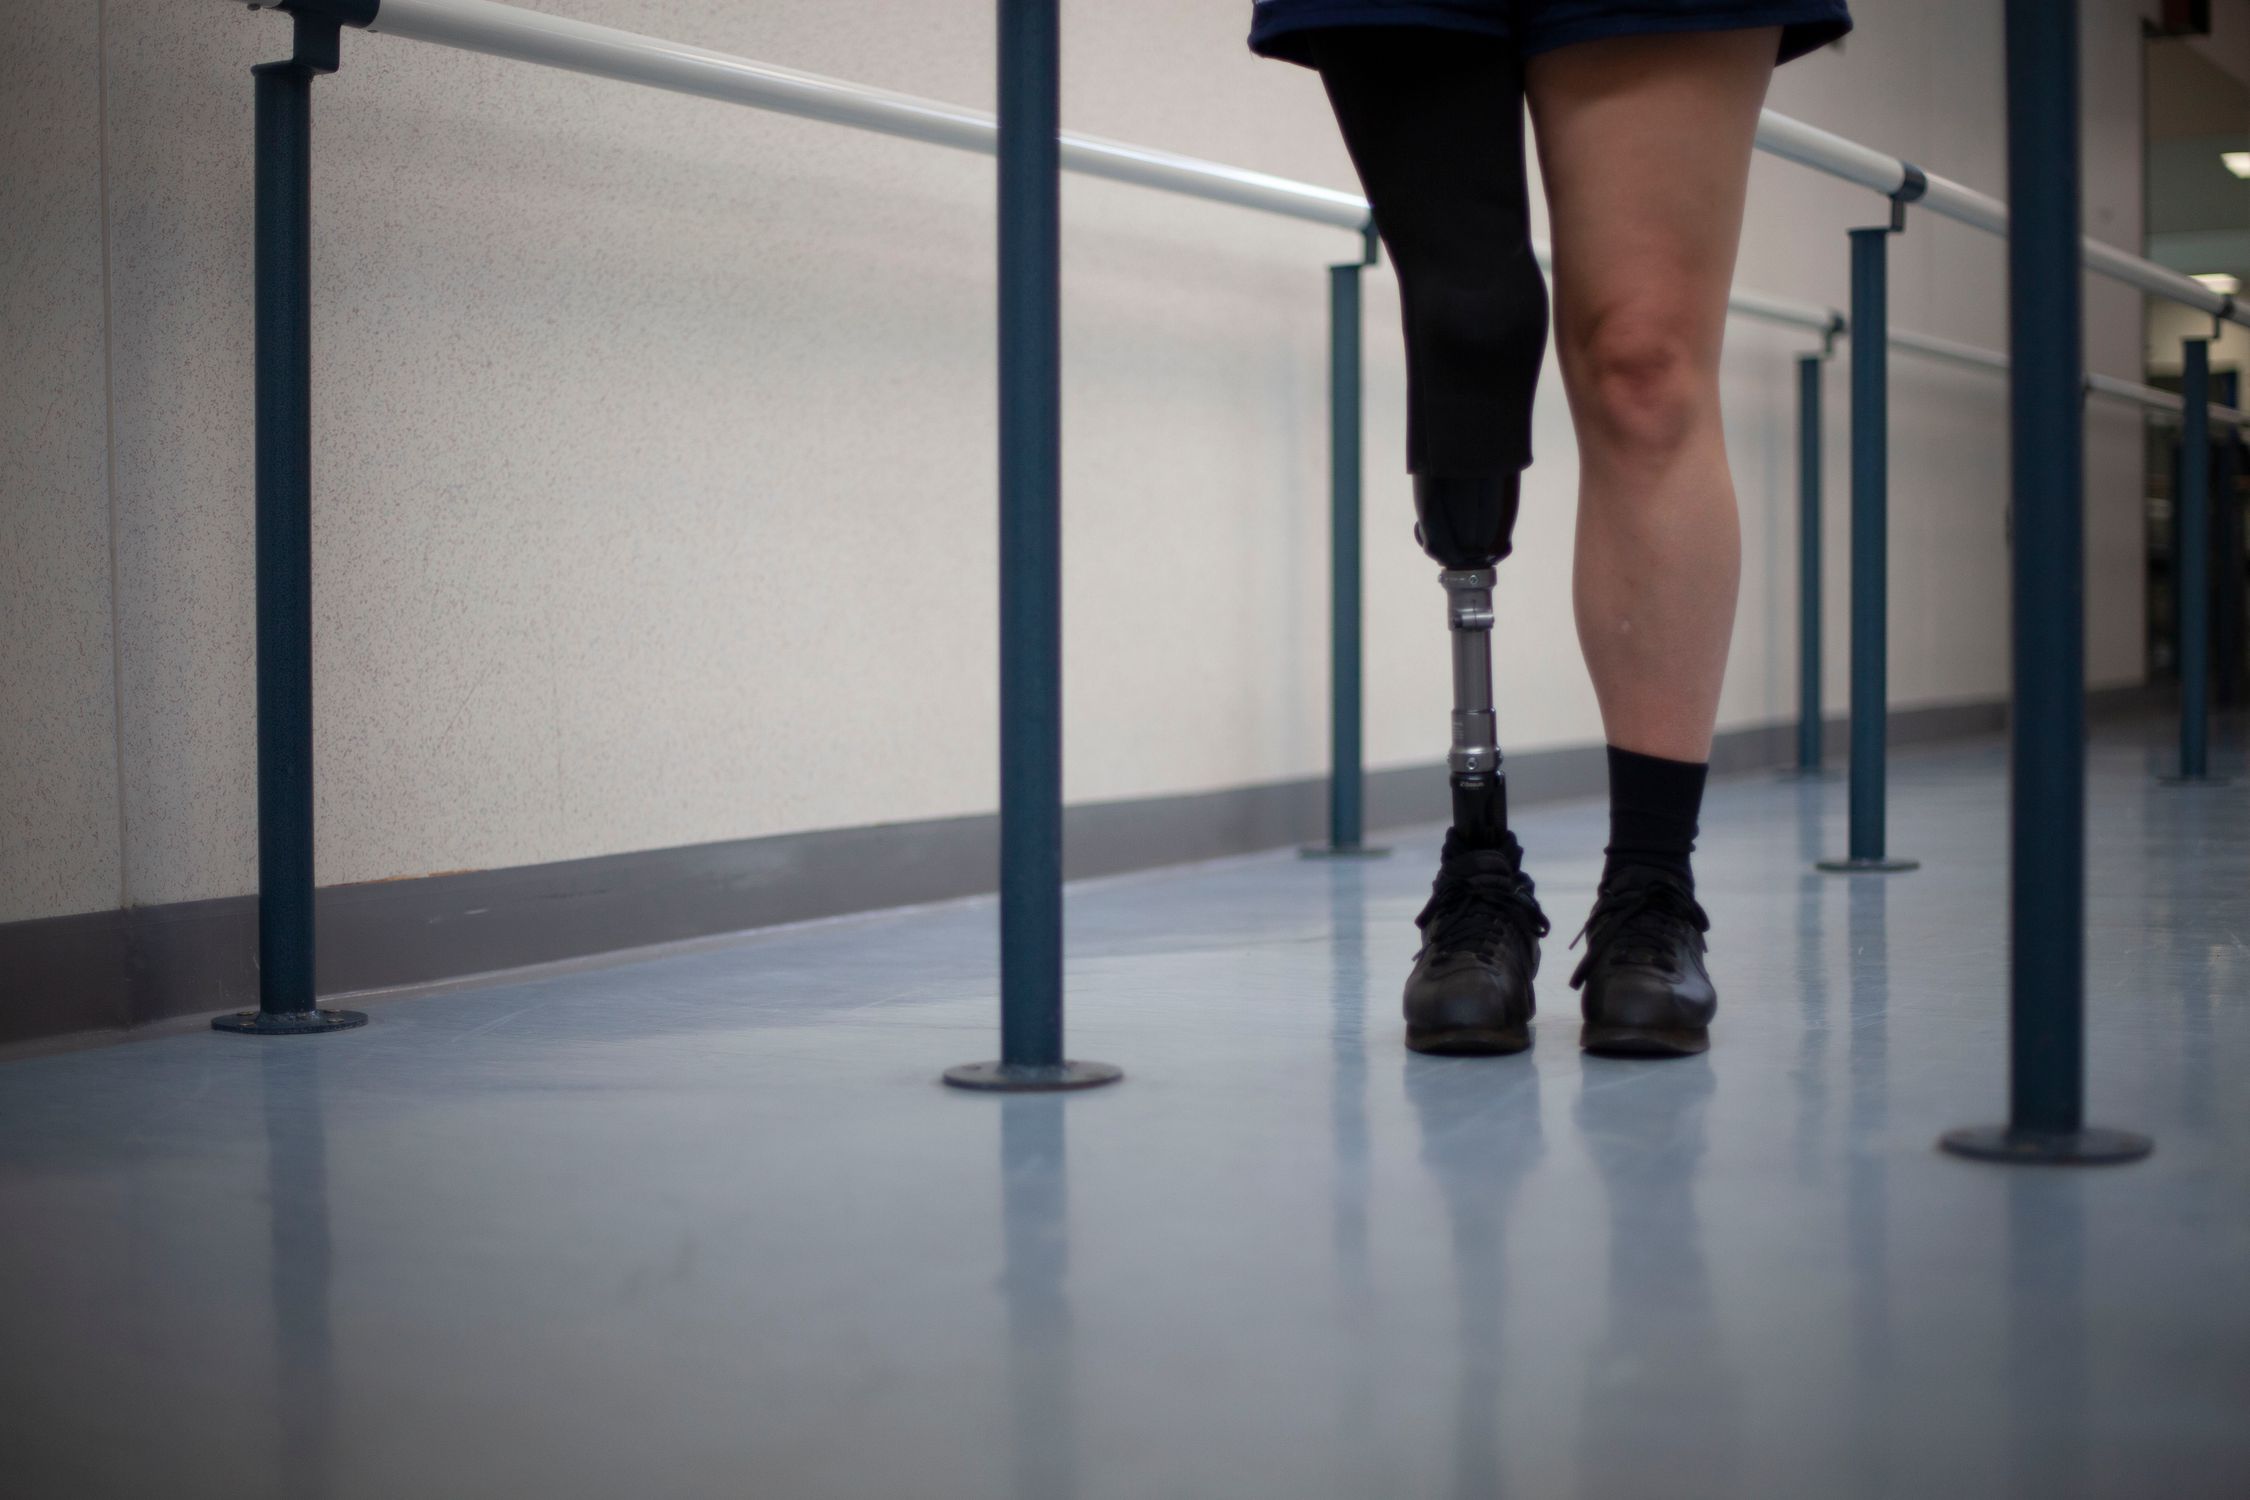 The photo shows the lower half of an individual walking with the aid of a prosthetic leg. The person is wearing shorts, a single black sock, and black shoes. The flooring is a smooth, reflective surface, and there are handrails alongside, suggesting a rehabilitation facility or a space designed for physical therapy. The focus on the prosthetic leg highlights themes of mobility, recovery, and adaptive technology.